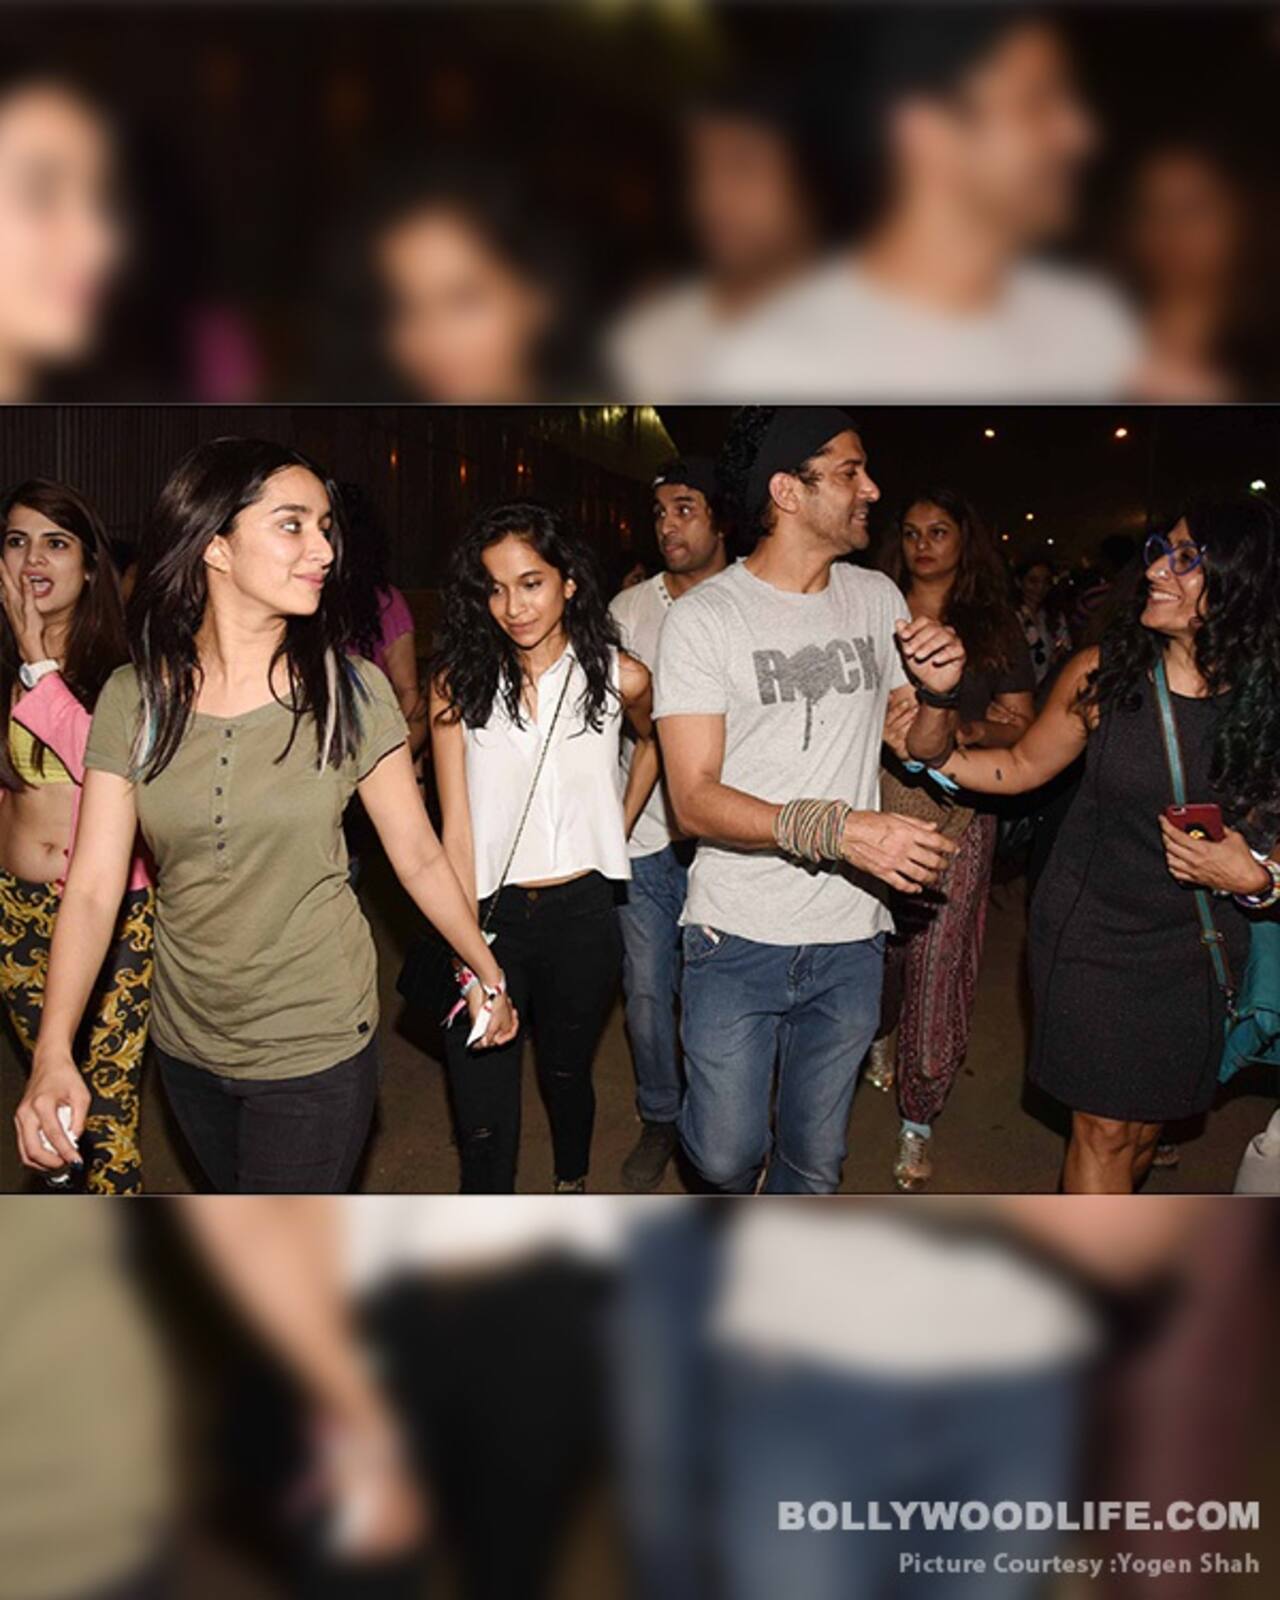 Rumoured couple Shraddha Kapoor-Farhan Akhtar spotted together at the Coldplay concert event - View HQ pics